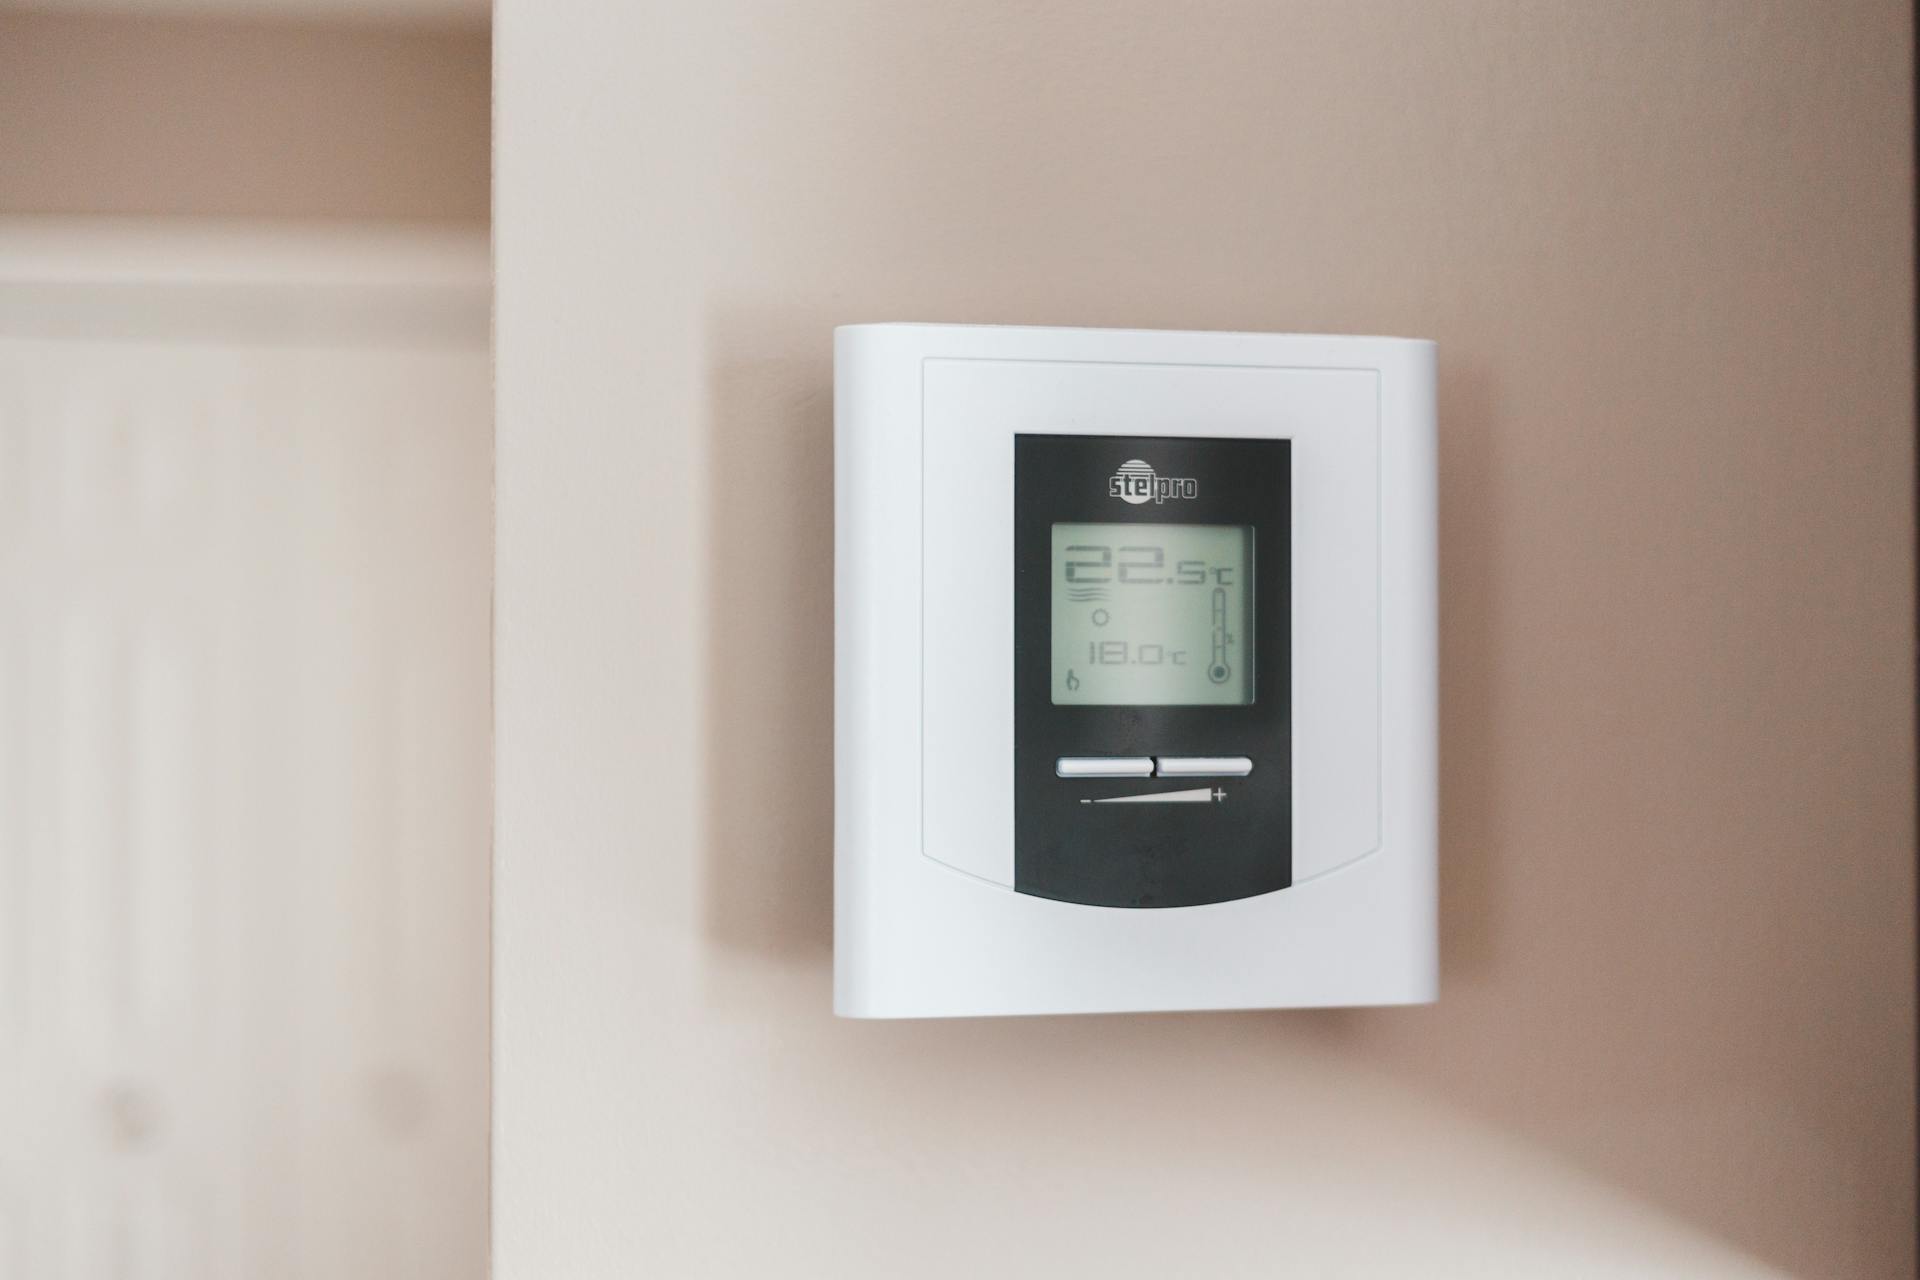 A thermostat on the wall | Source: Pexels